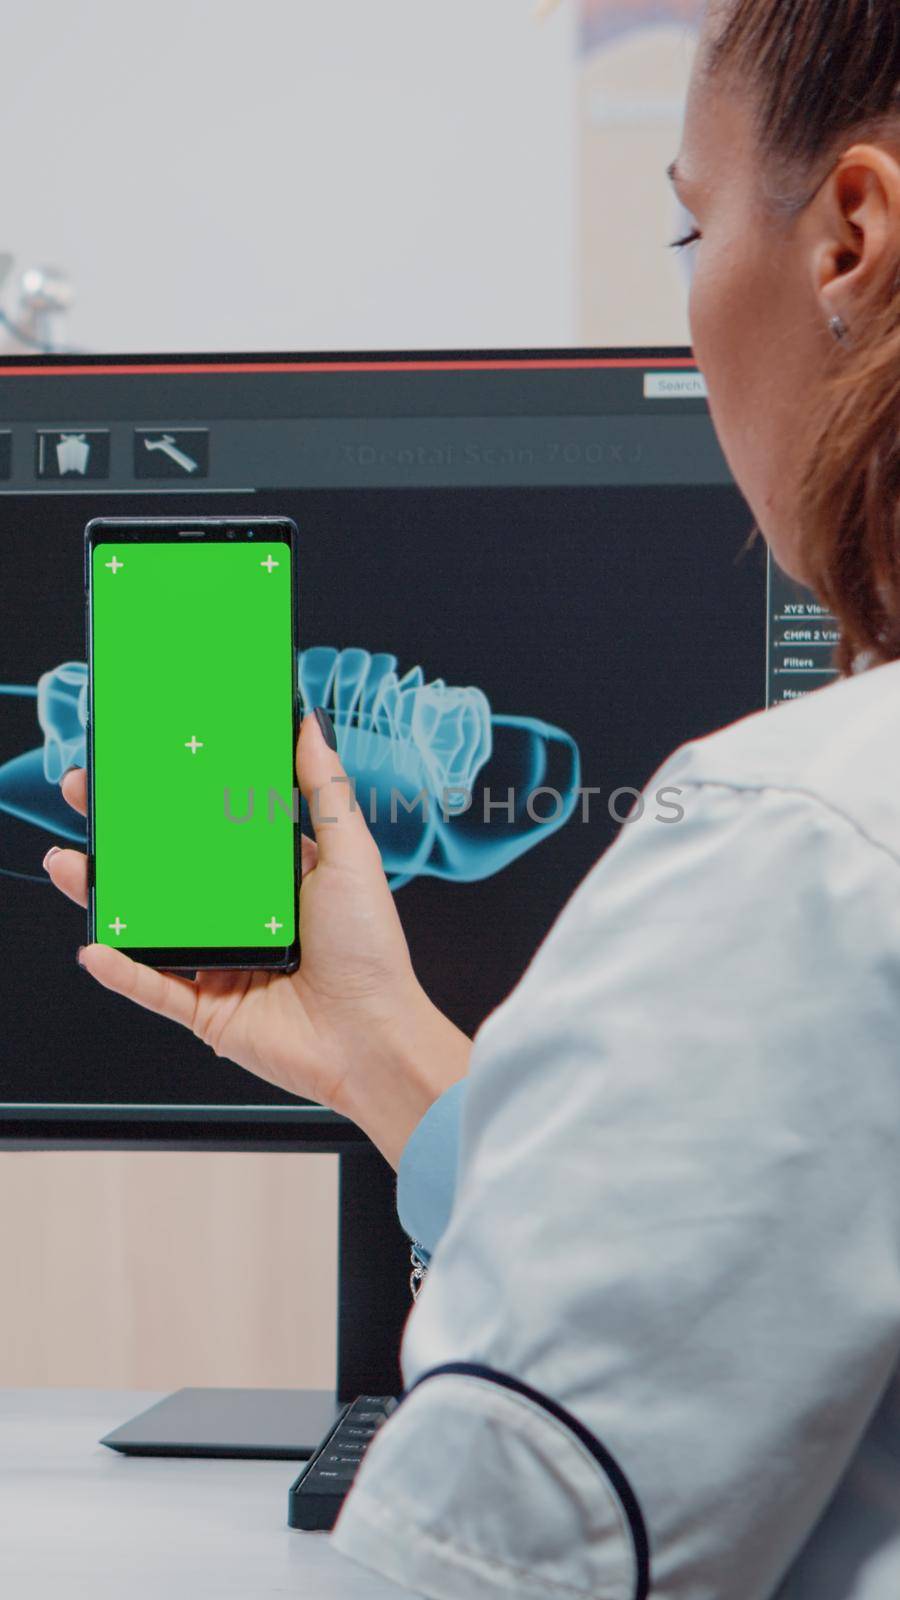 Dentist vertically holding smartphone with green screen by DCStudio